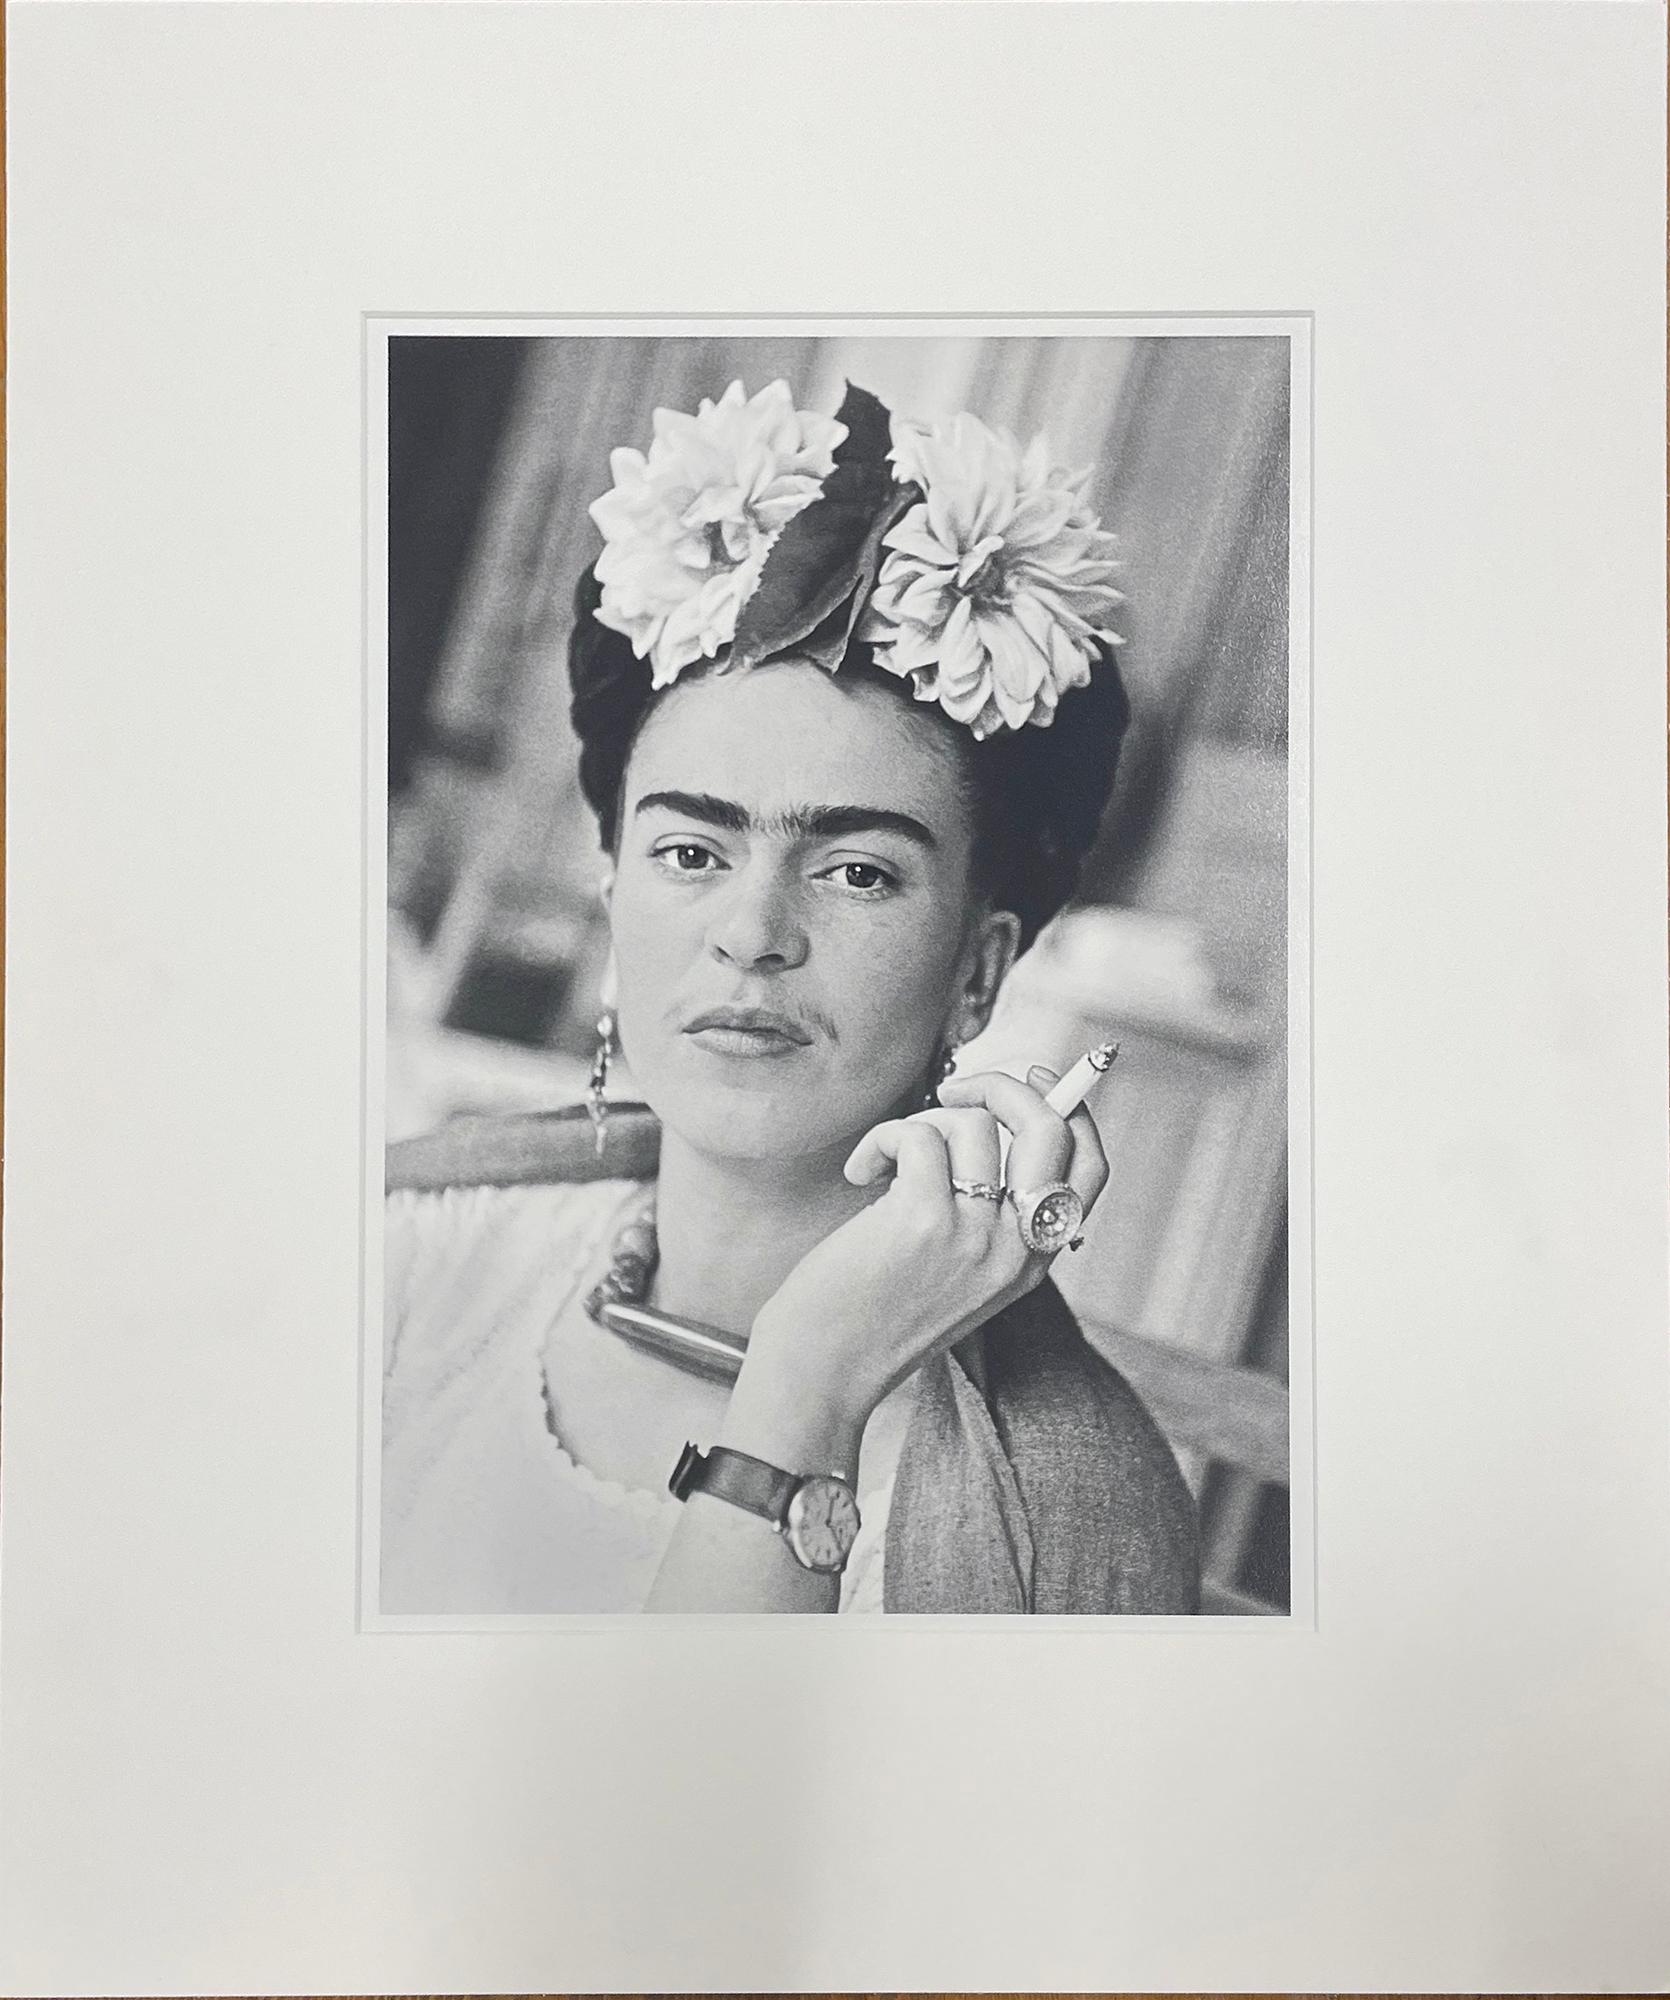 Frida with Cigarette - Photograph by Nickolas Muray